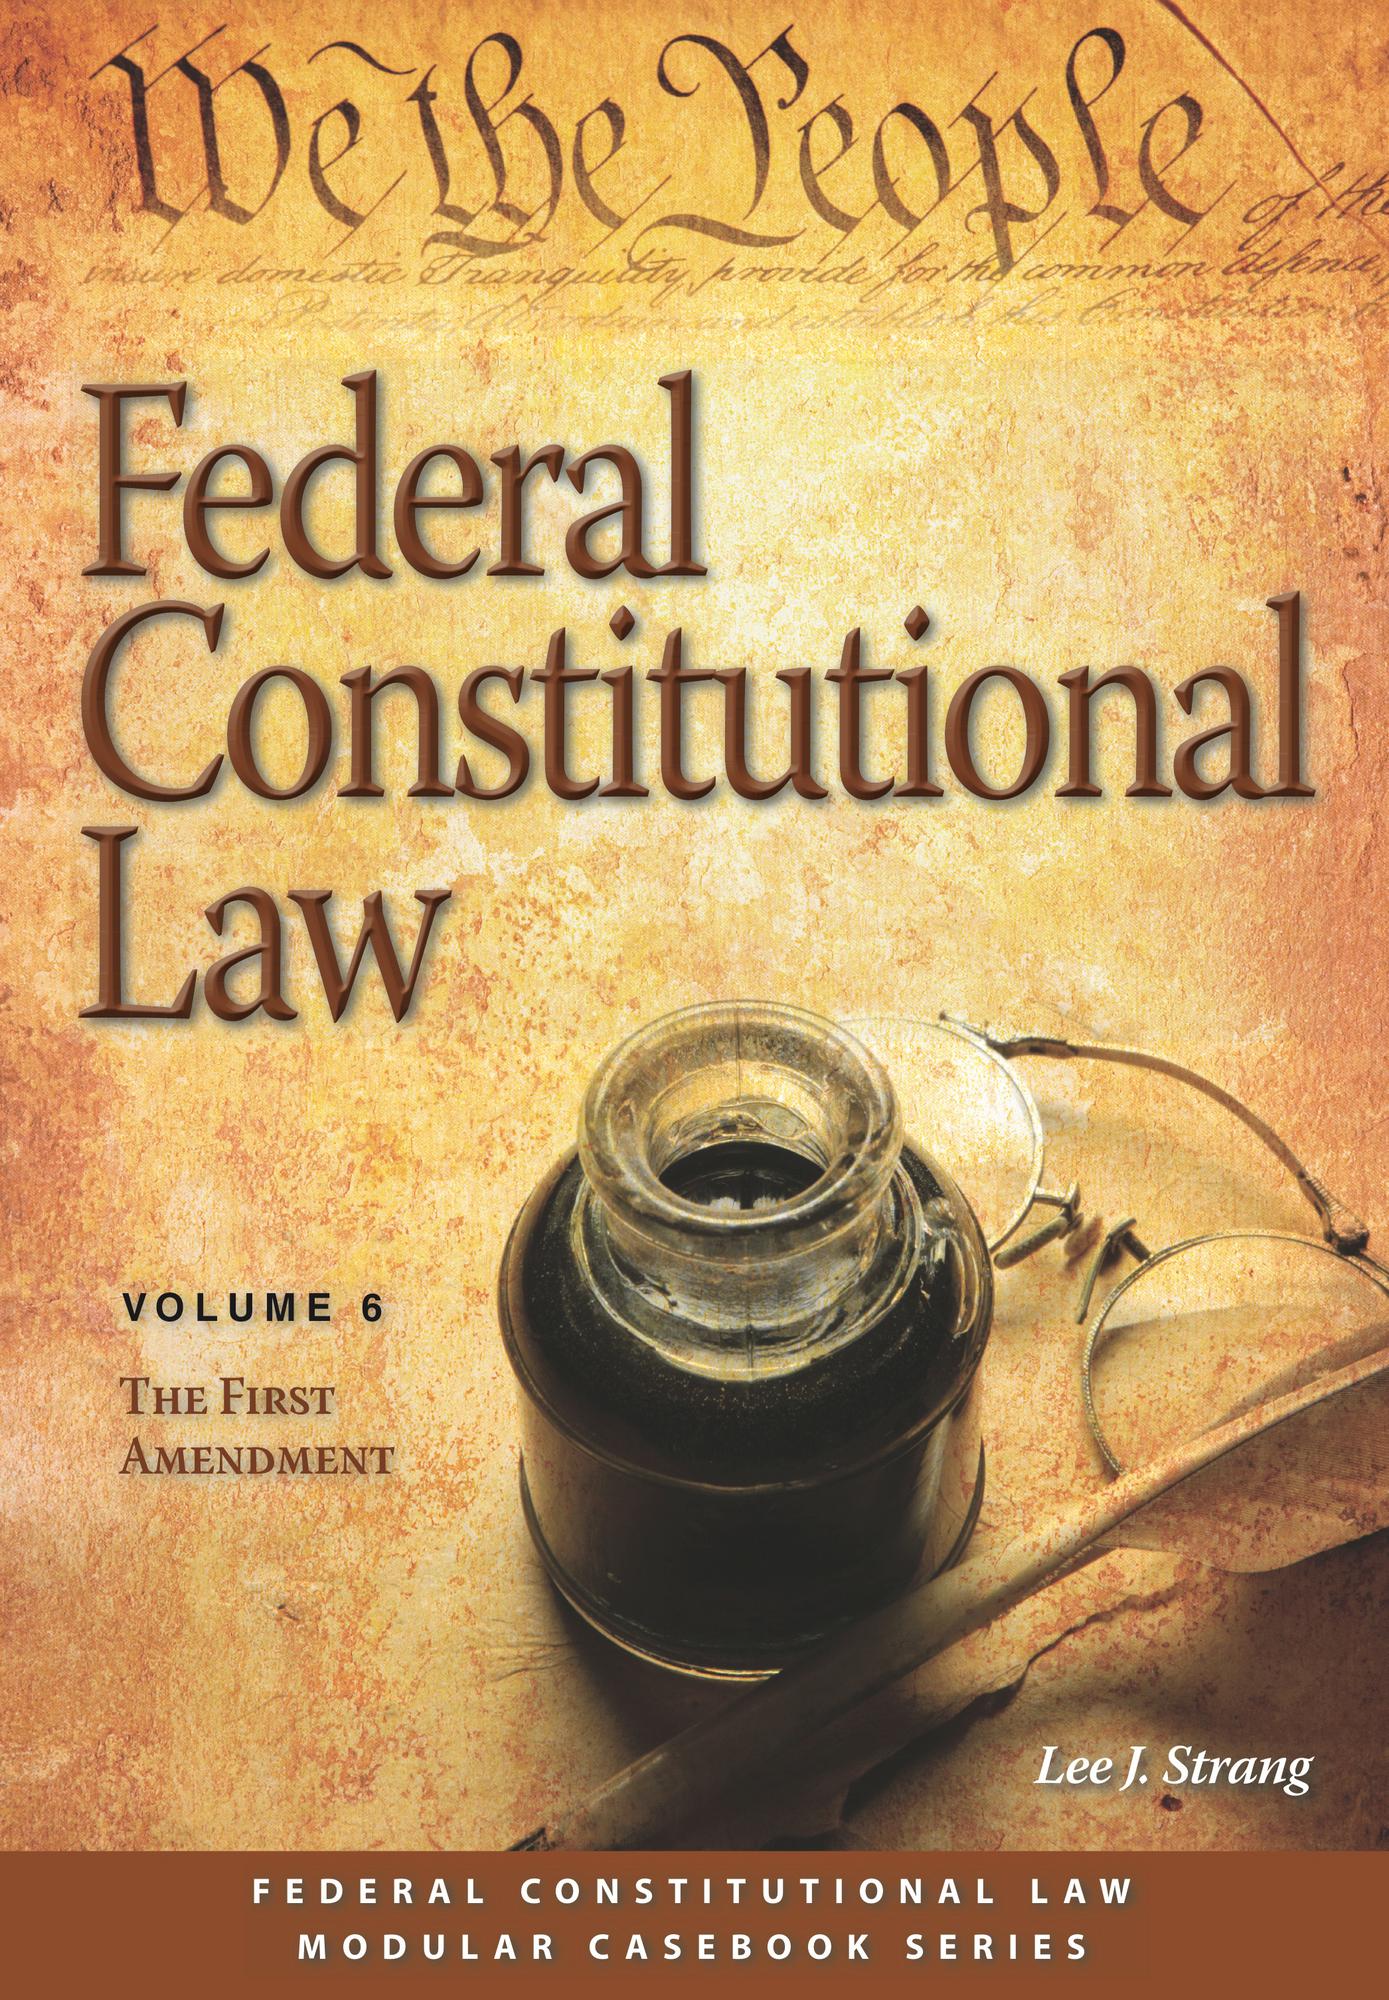 Federal Constitutional Law (Volume 6)